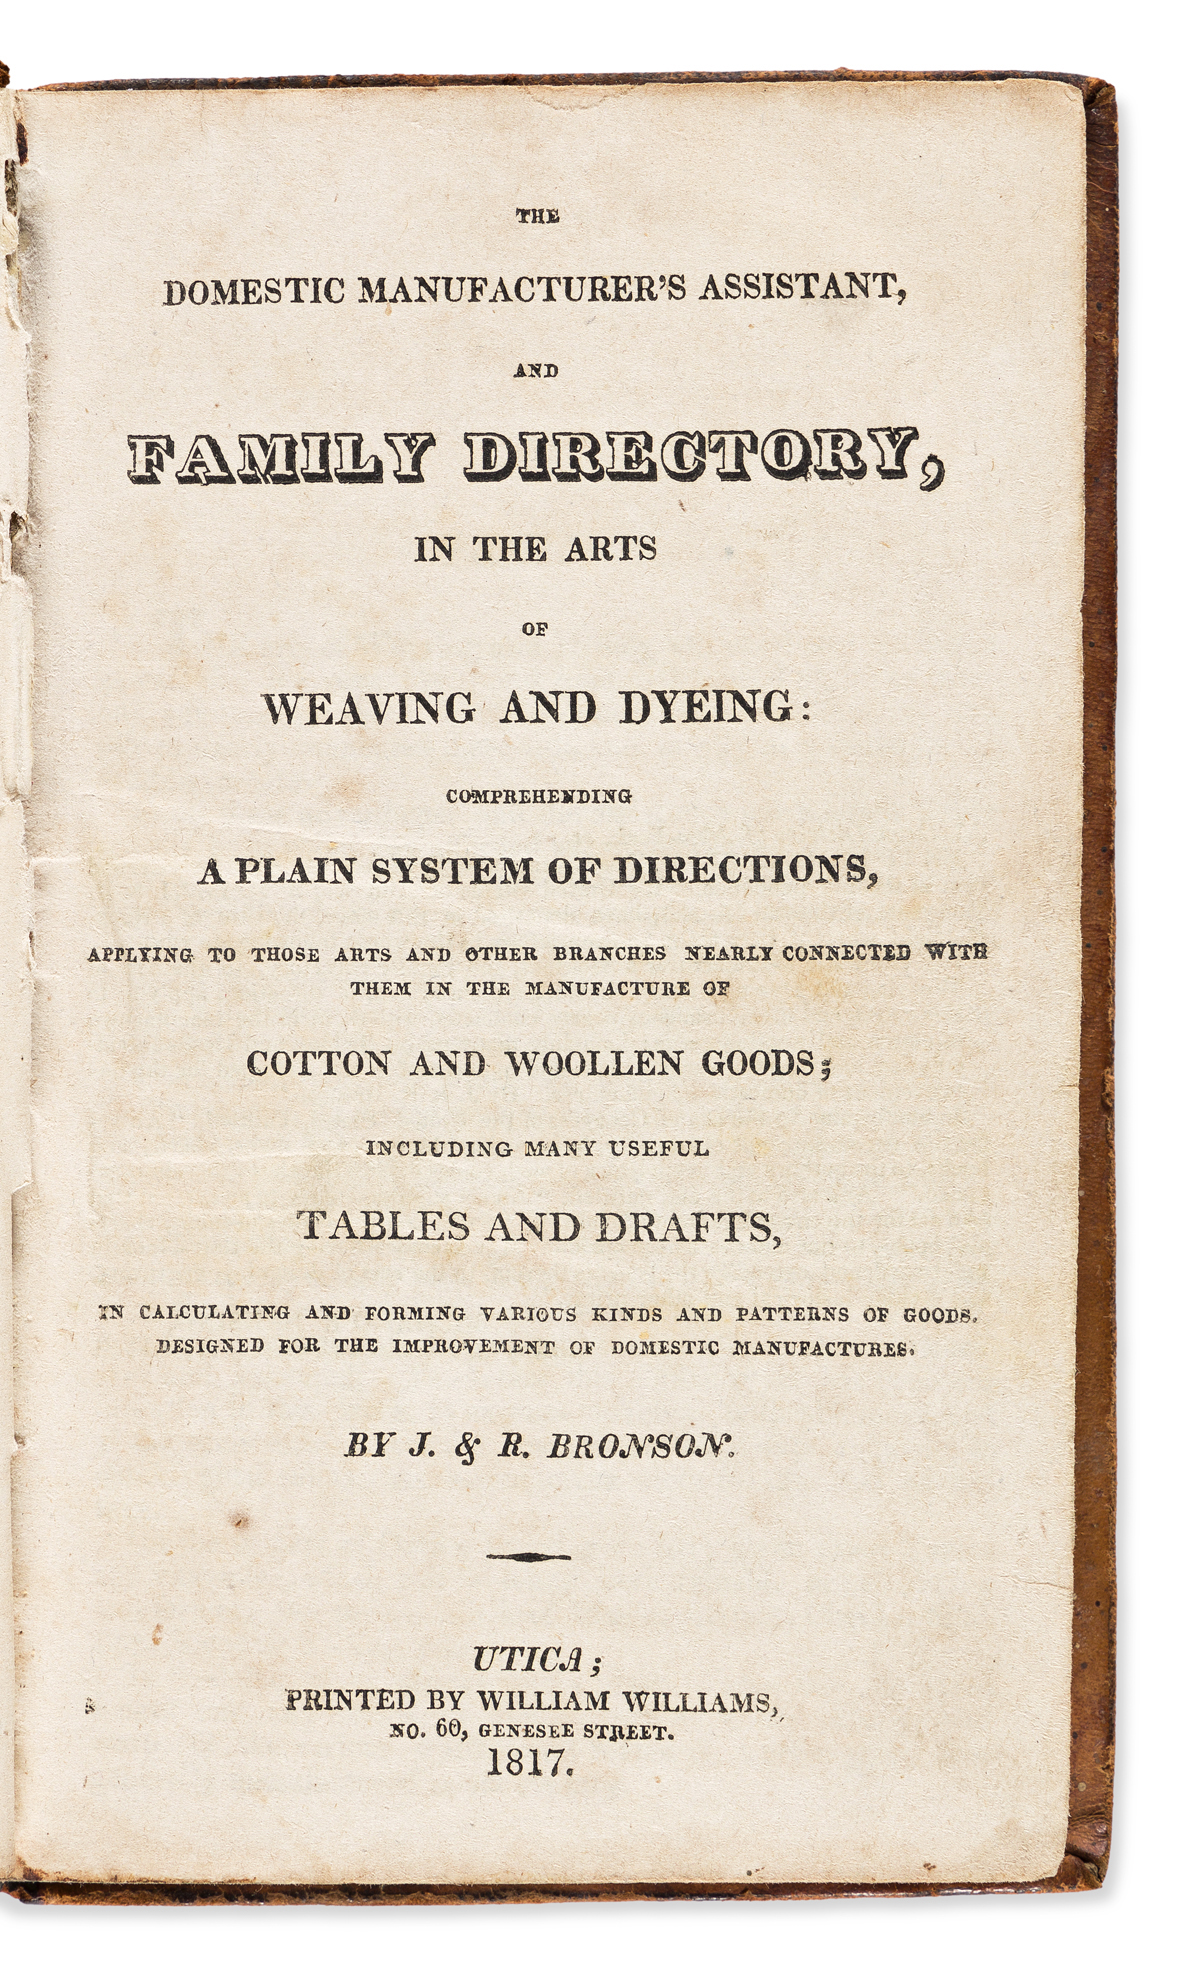 Weaving, Dying, and Recipes: Two 19th Century American Imprints.